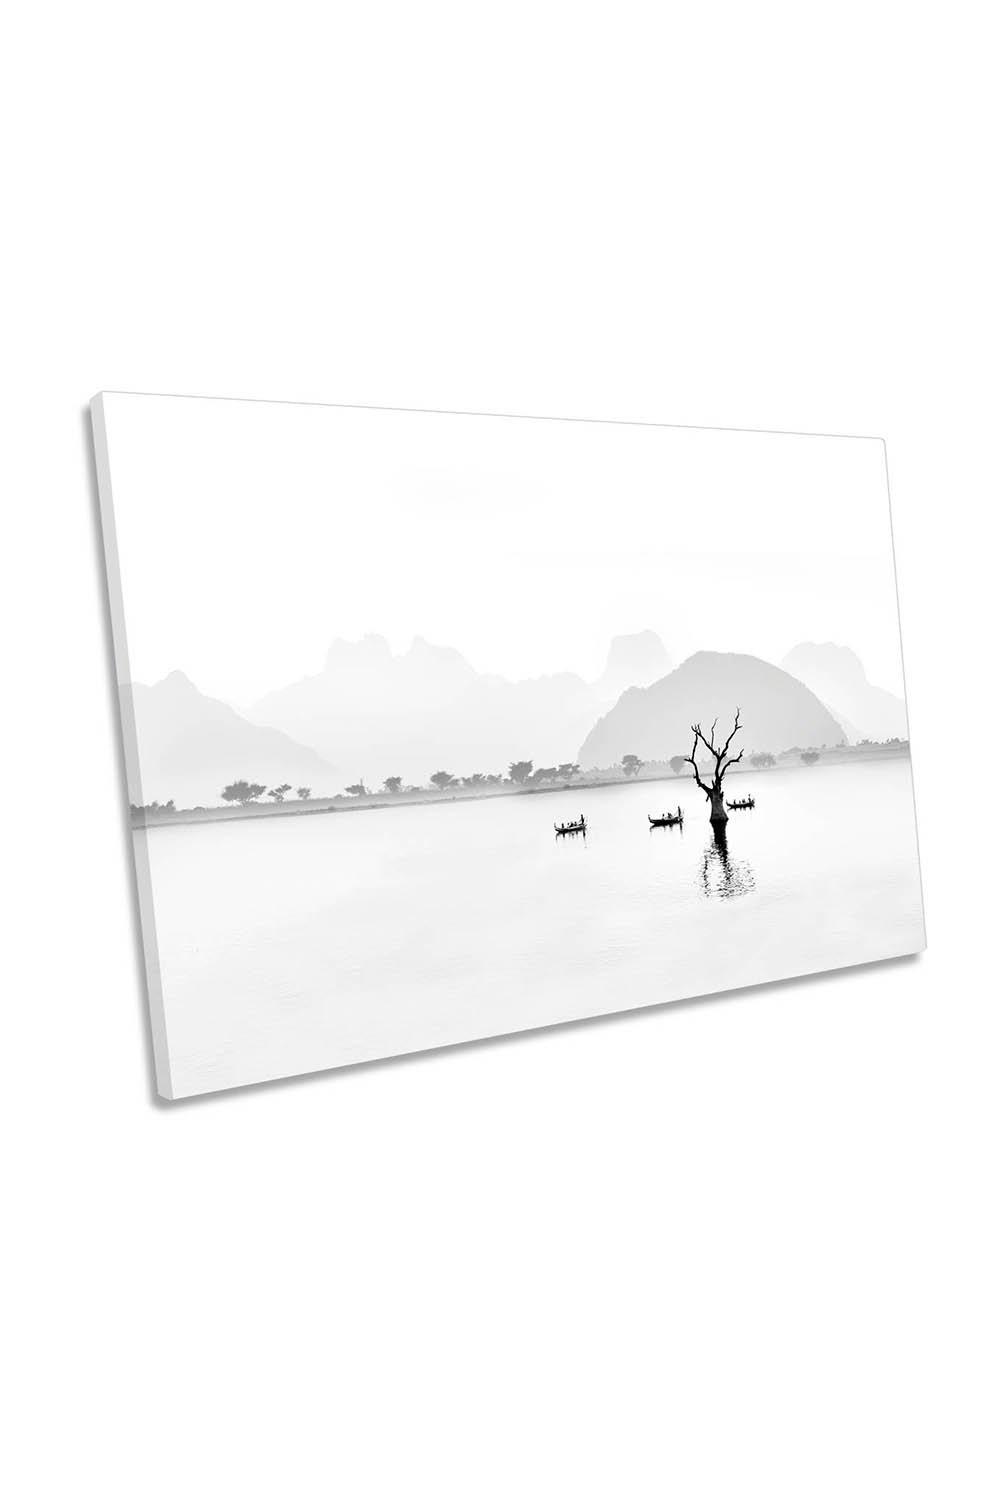 Boats in the Lake Fishermen Myanmar Asia Canvas Wall Art Picture Print